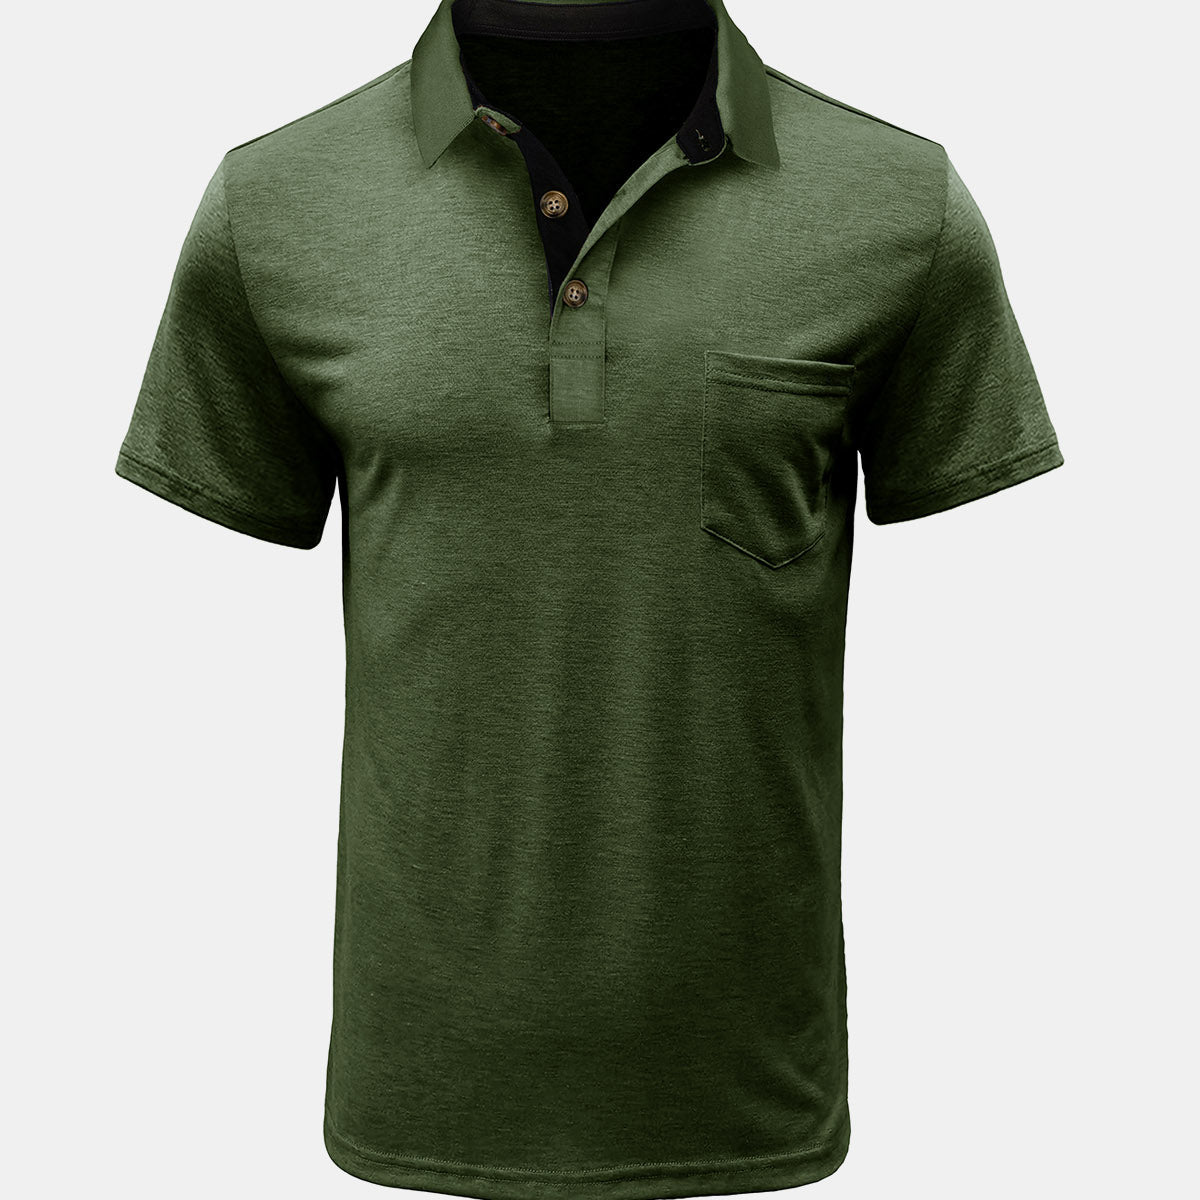 Men's Summer Casual Breathable Pocket Solid Color Short Sleeve Polo Shirt